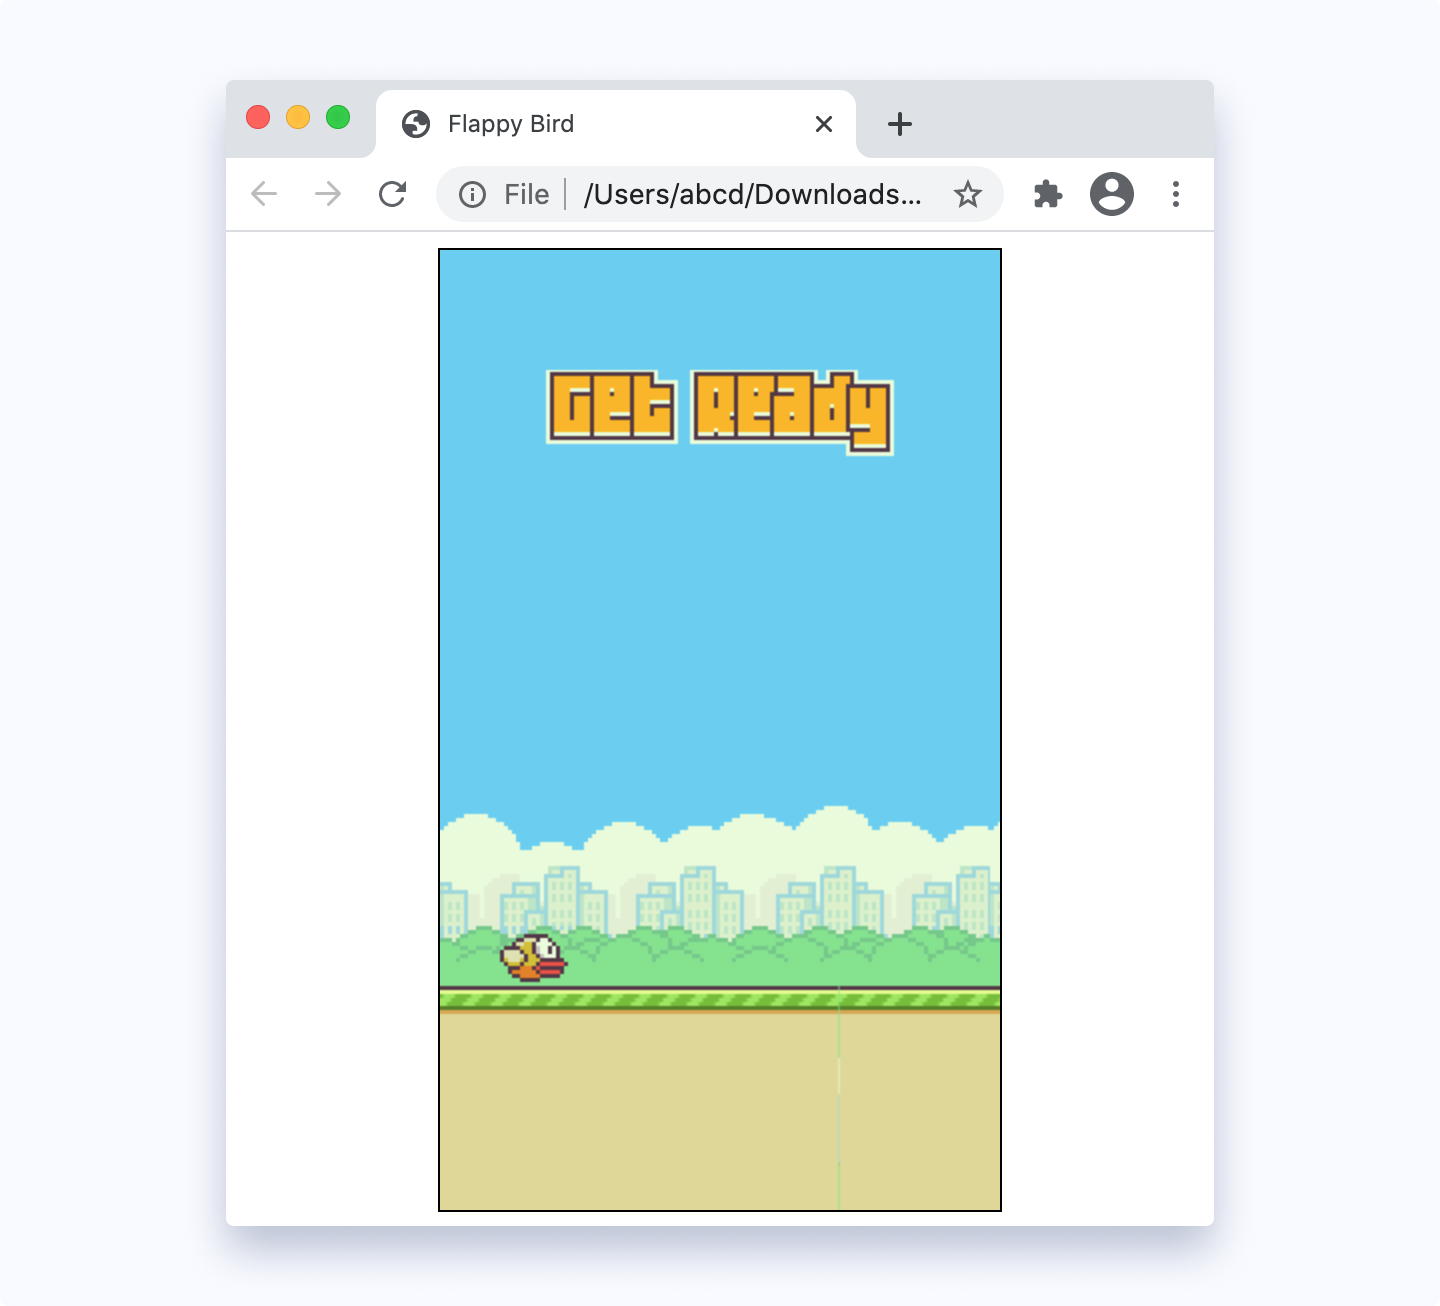 Example of a game created in JS